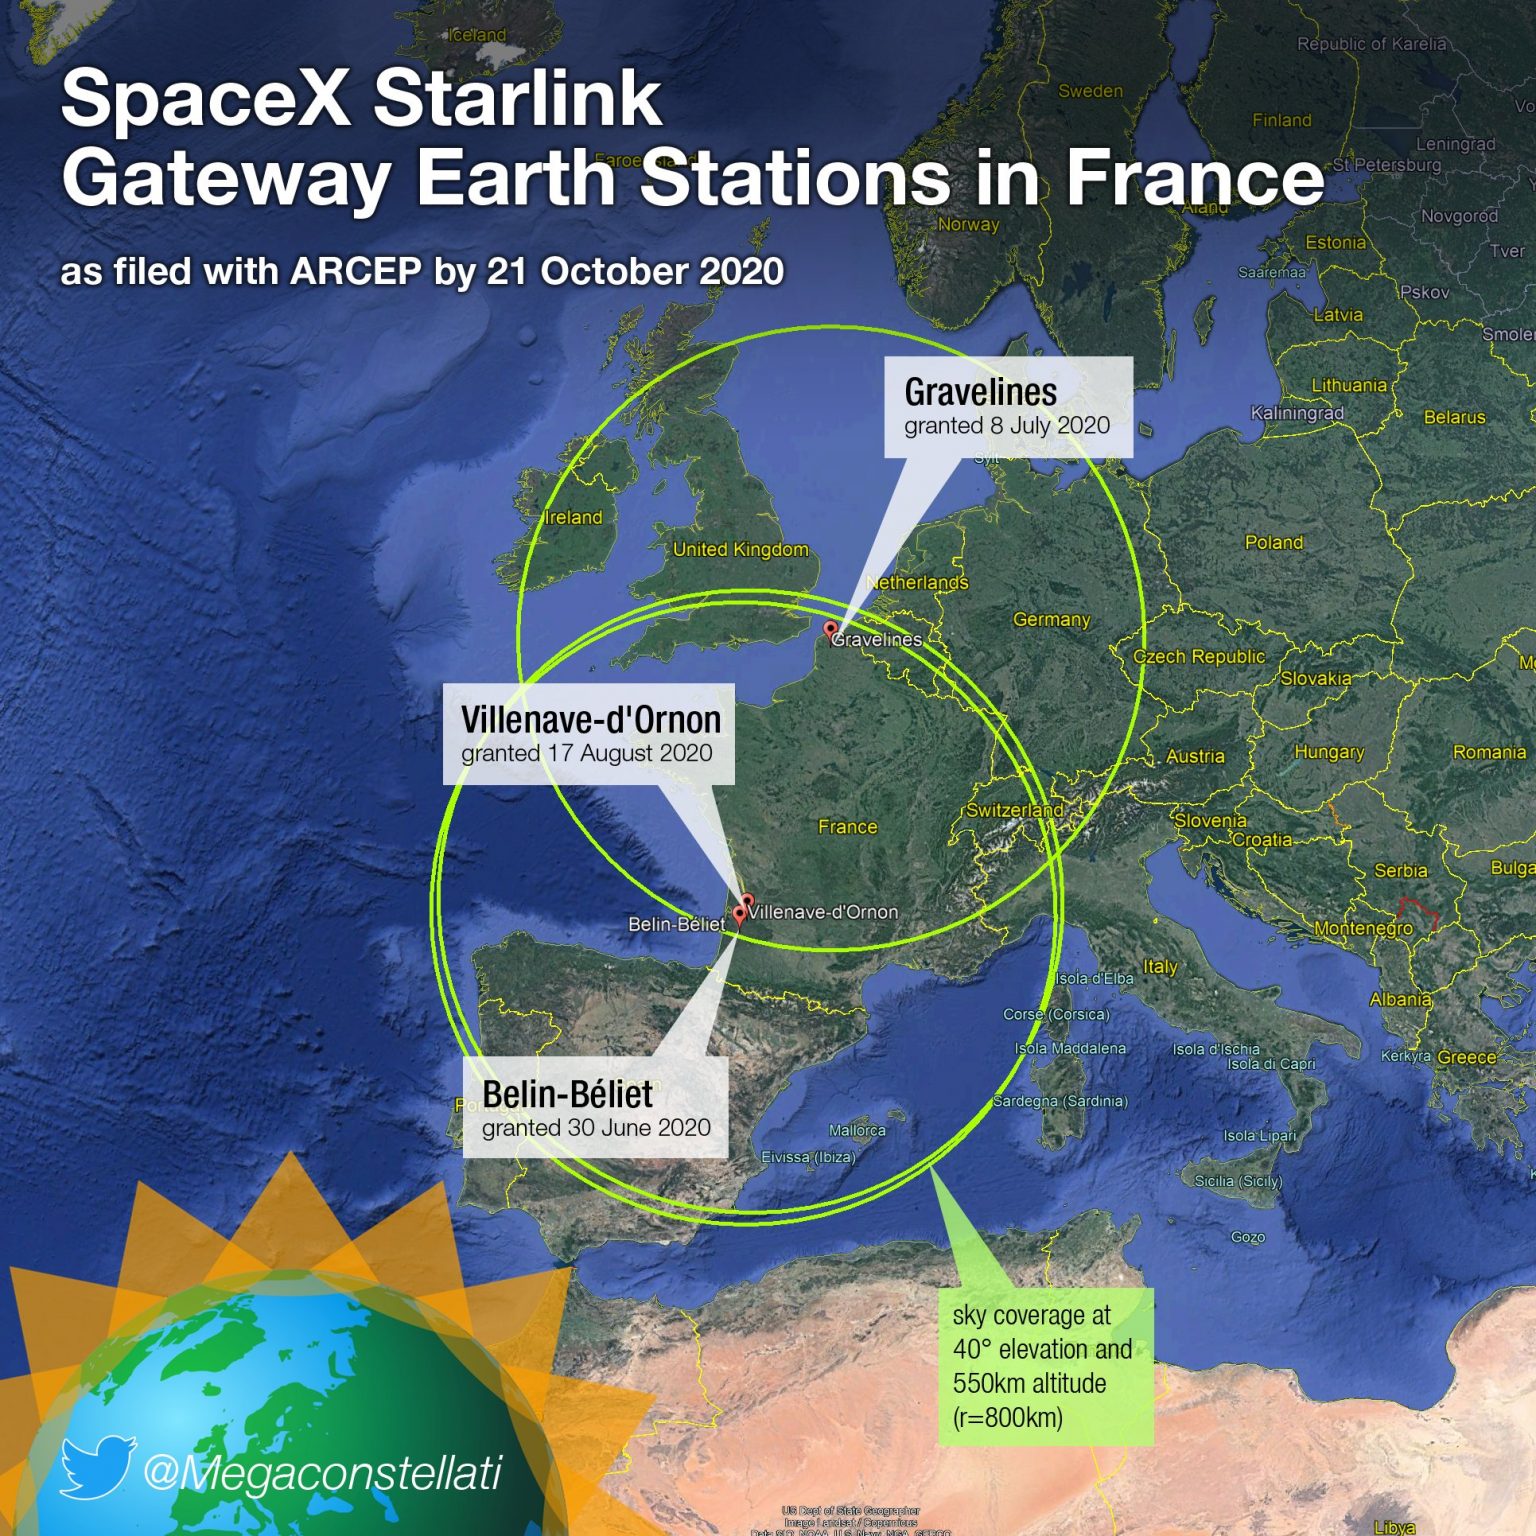 SpaceX selects 3 European gateways for Starlink | Advanced Television